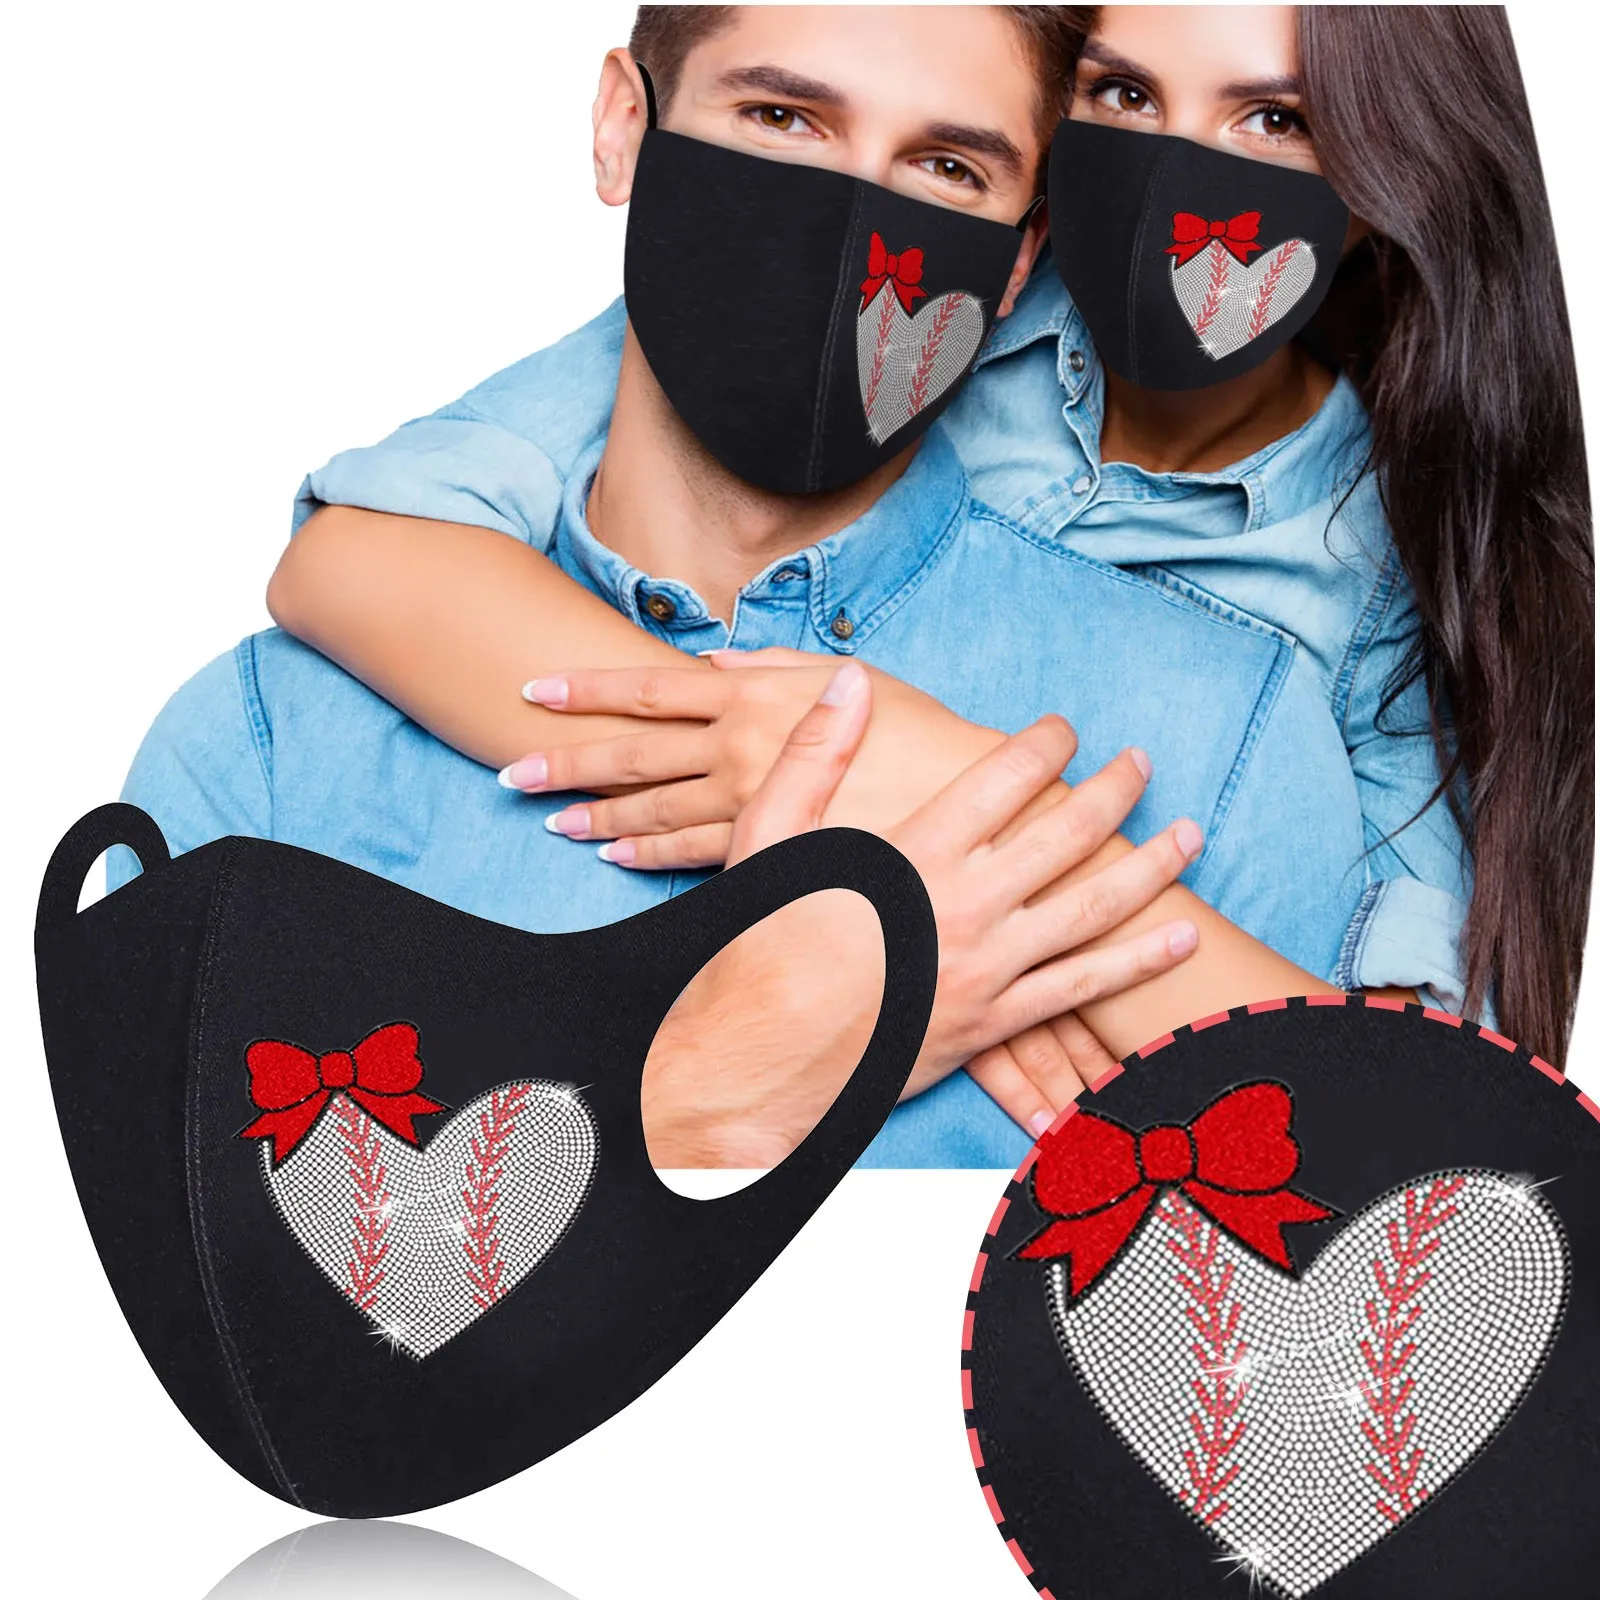 5pc Drill Breathable Valentine's Day Adult Mask Washable Reusable Cotton Face Mask Festiavl Print Wasbaar Halloween Mask Cosplay cowboy cosplay